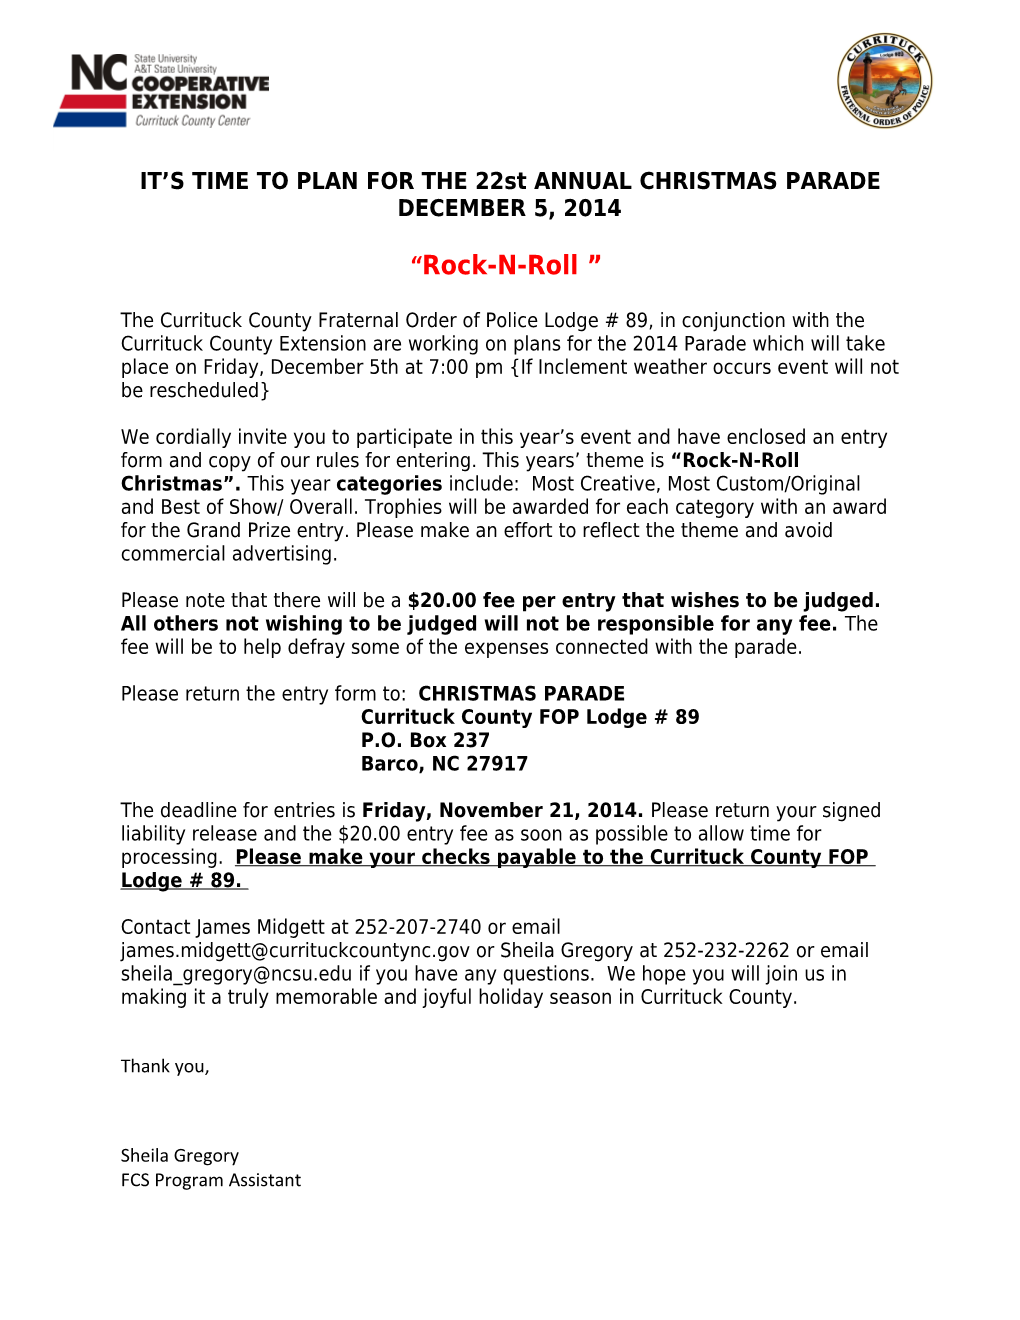 IT S TIME to PLAN for the 22St ANNUAL CHRISTMAS PARADE